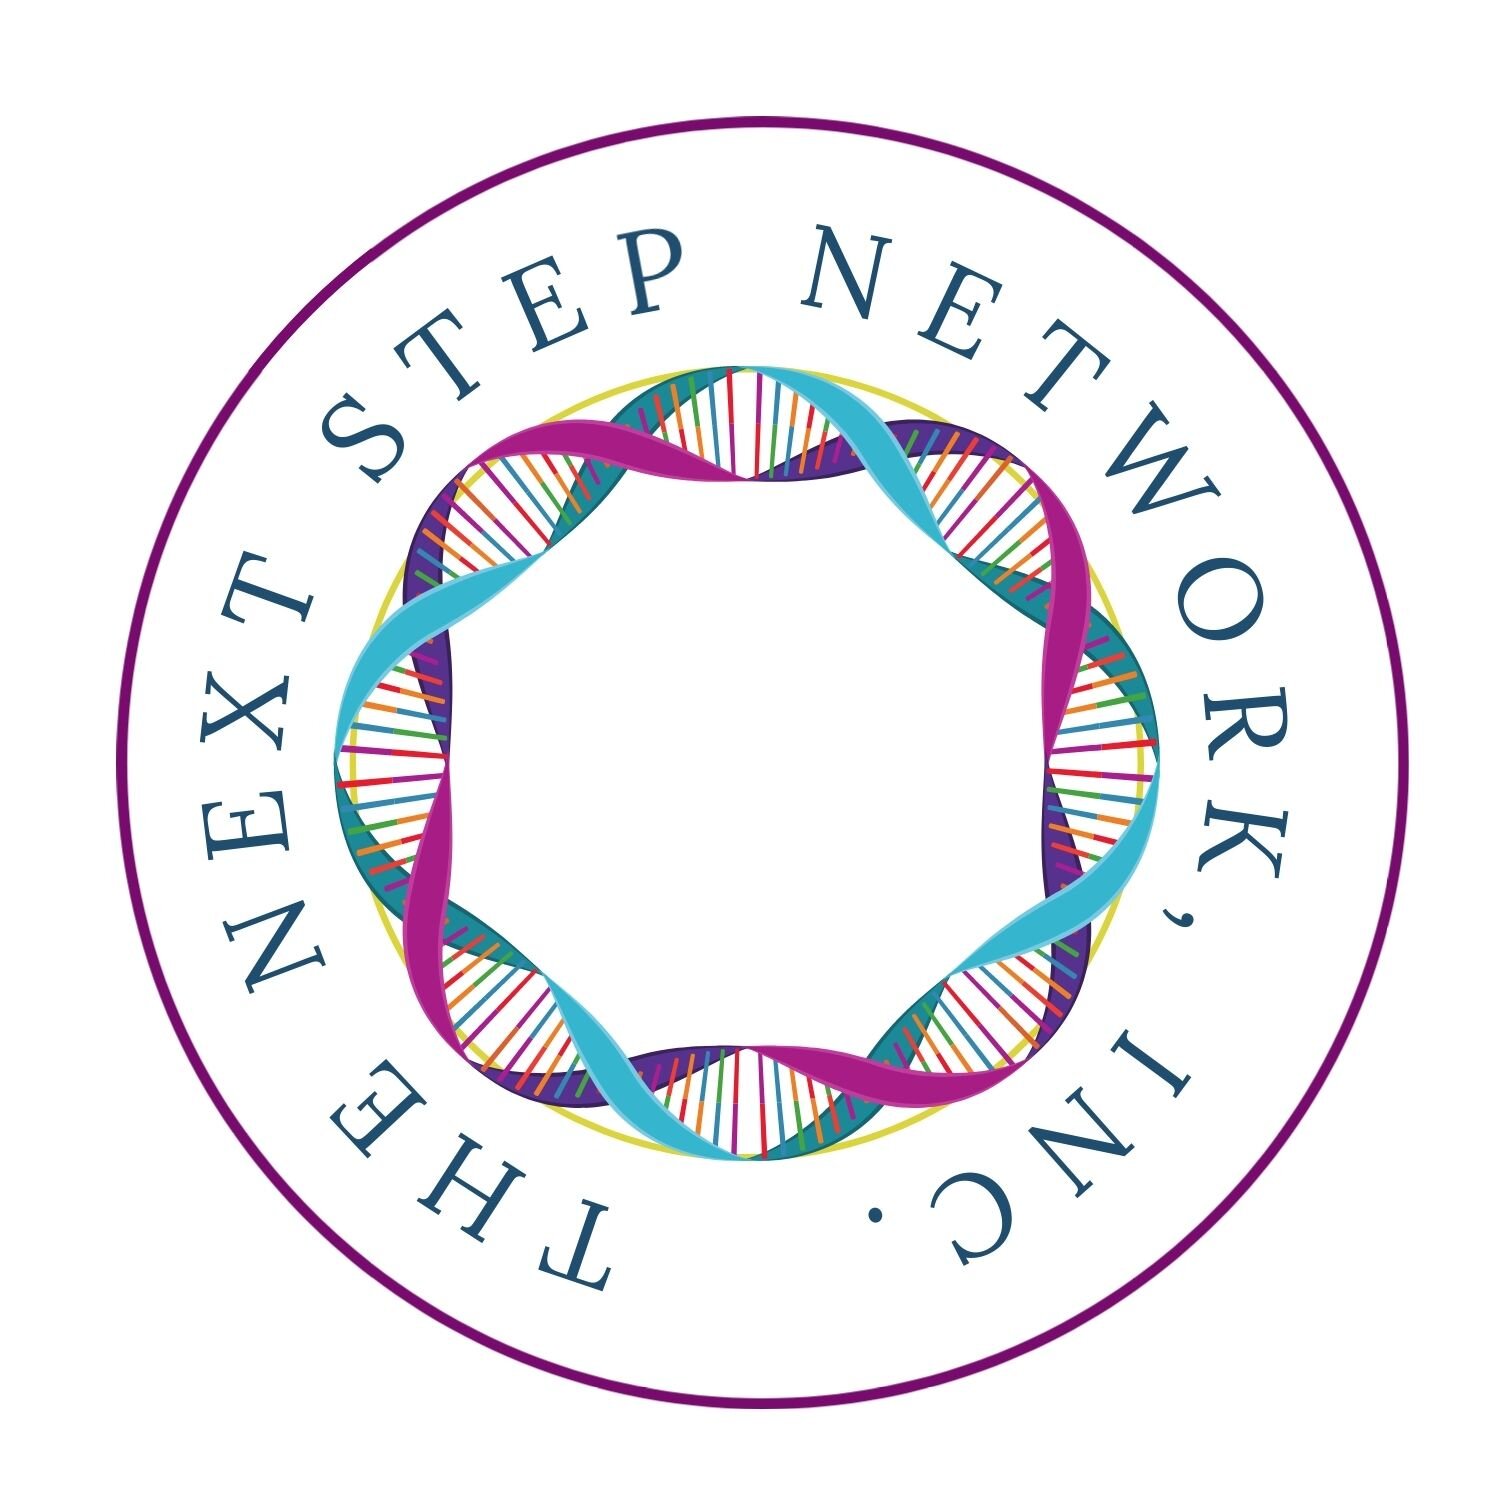 The Next Step Network